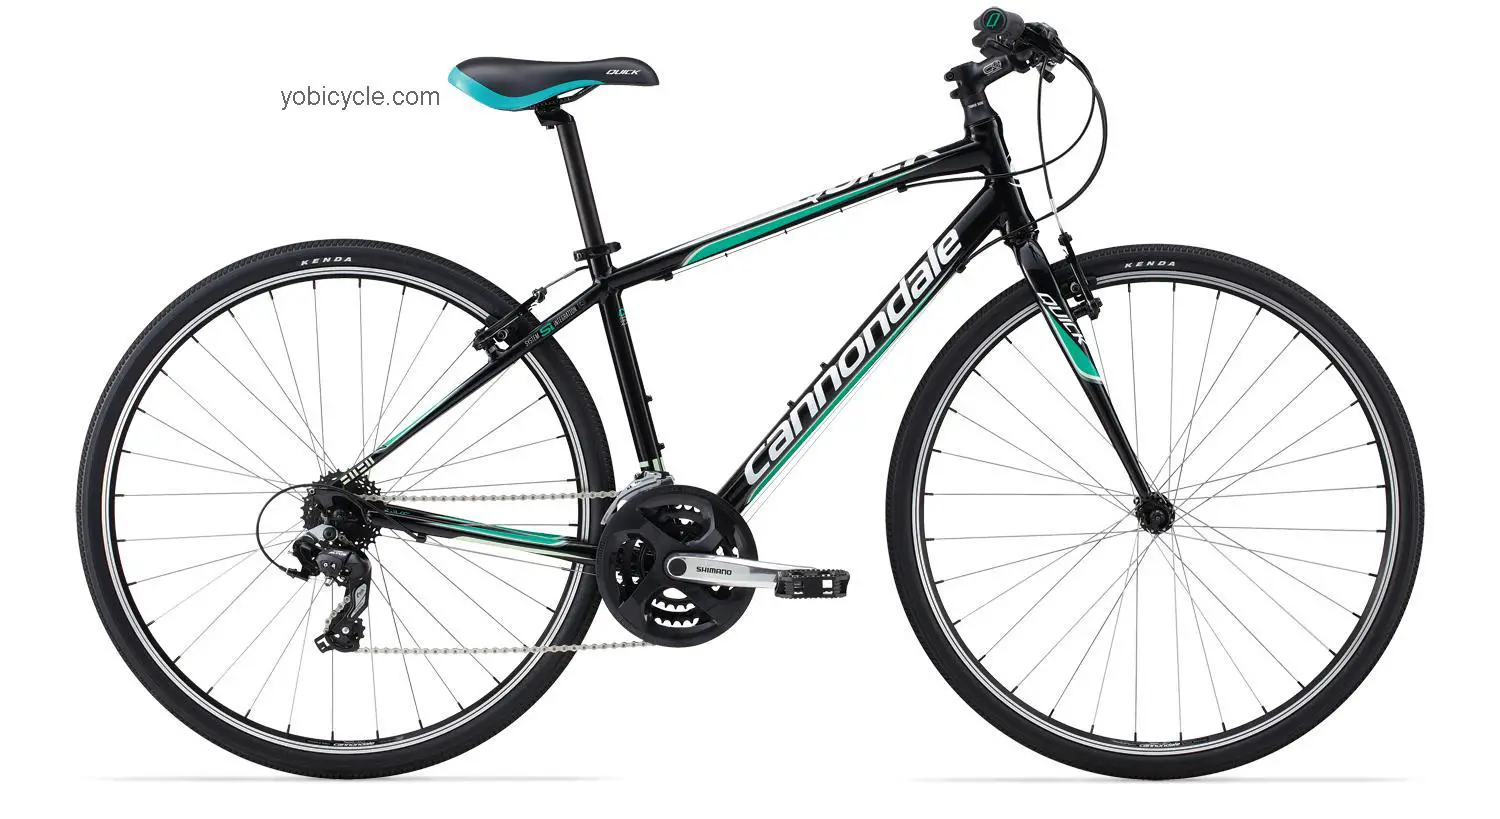 Cannondale  Quick Womens 6 Technical data and specifications